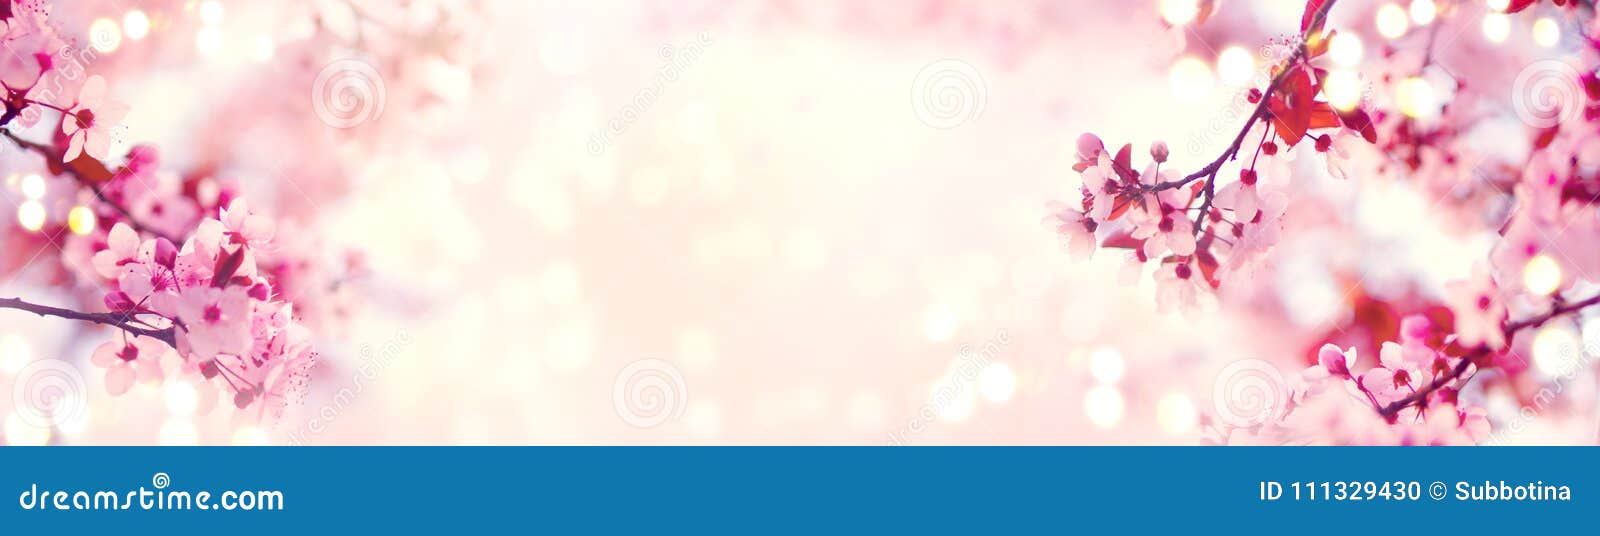 spring border or background art with pink blossom. beautiful nature scene with blooming tree